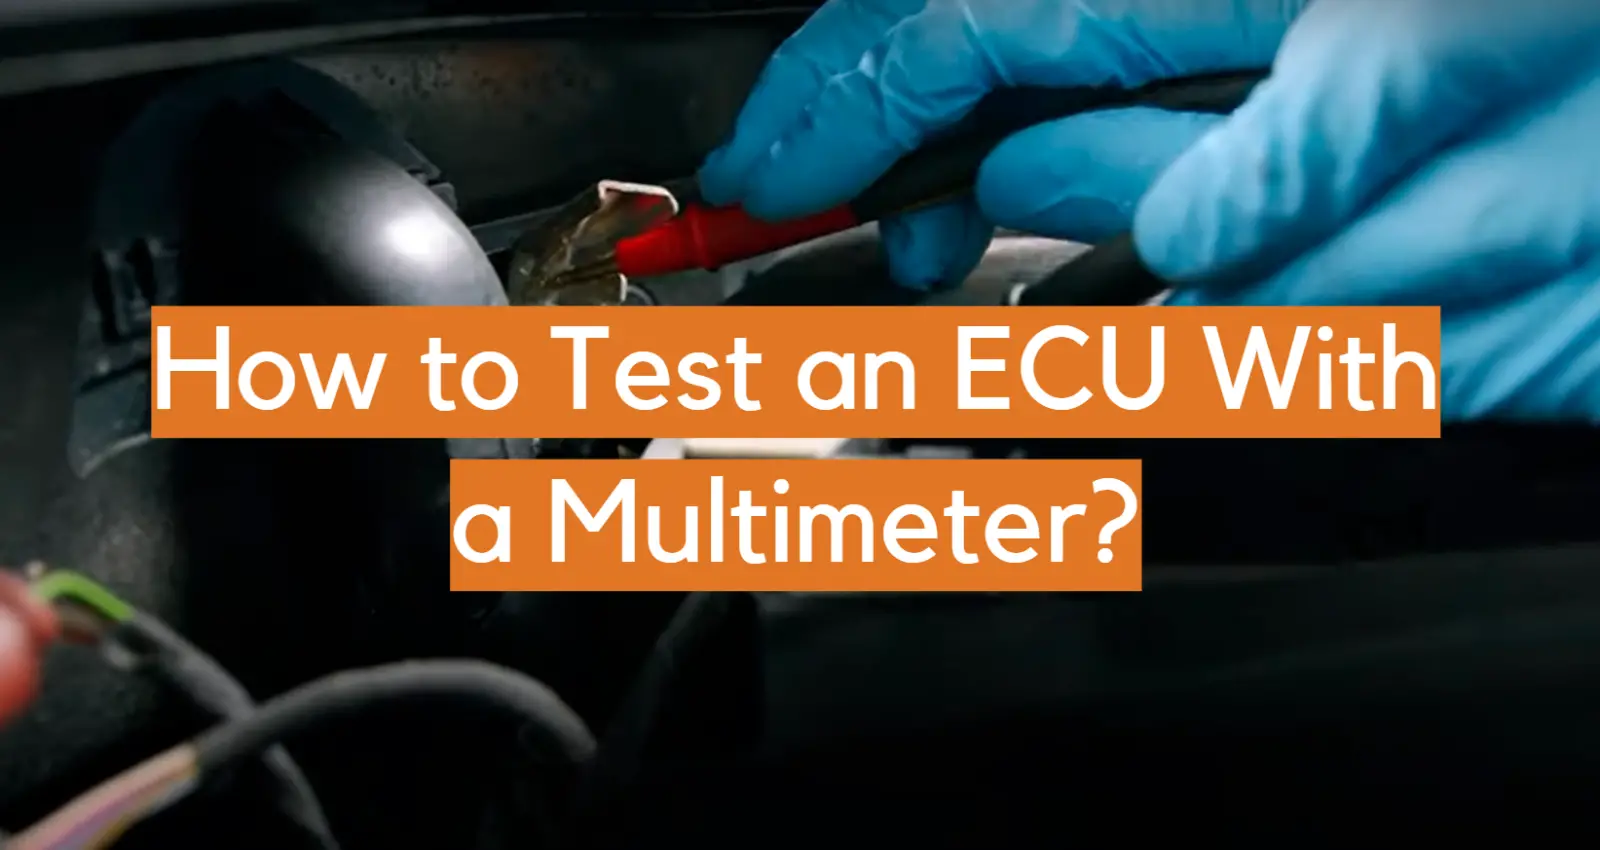 How to Test an ECU With a Multimeter?